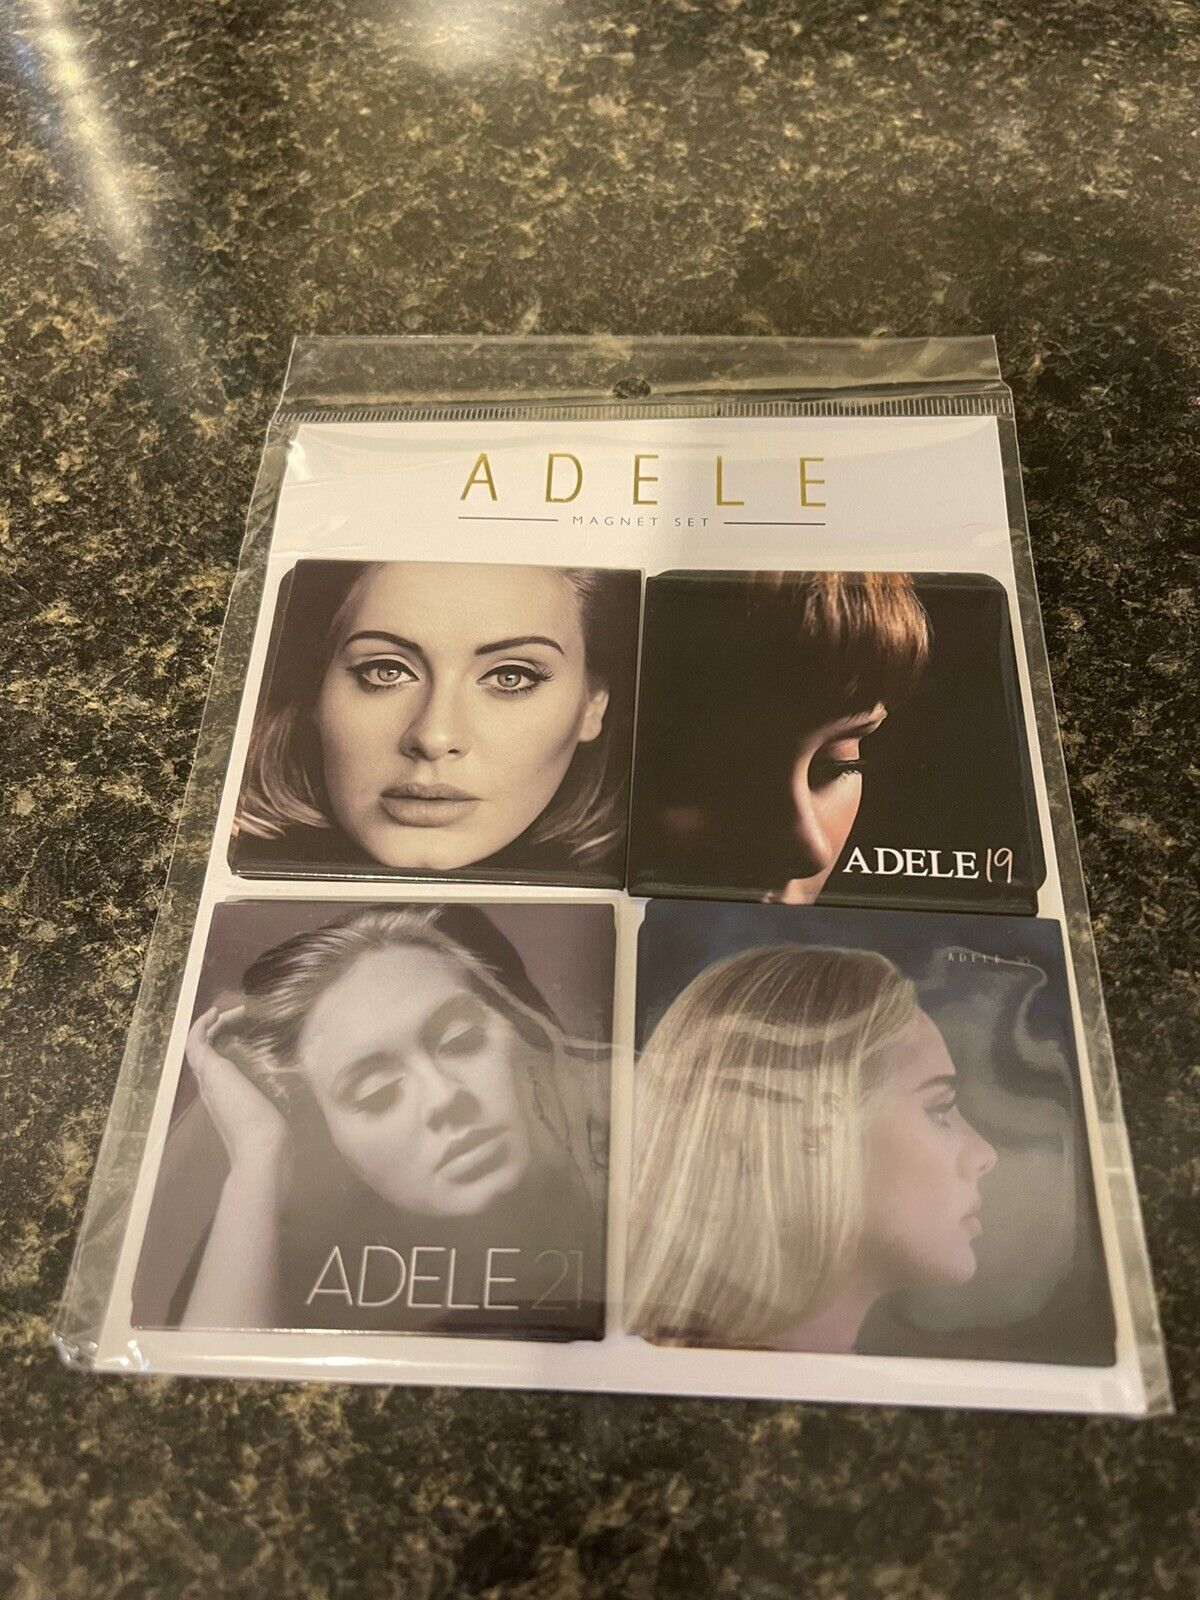 New Adele Magnet Set Las Vegas Weekend with Adele 4 Pack Collector Magnets